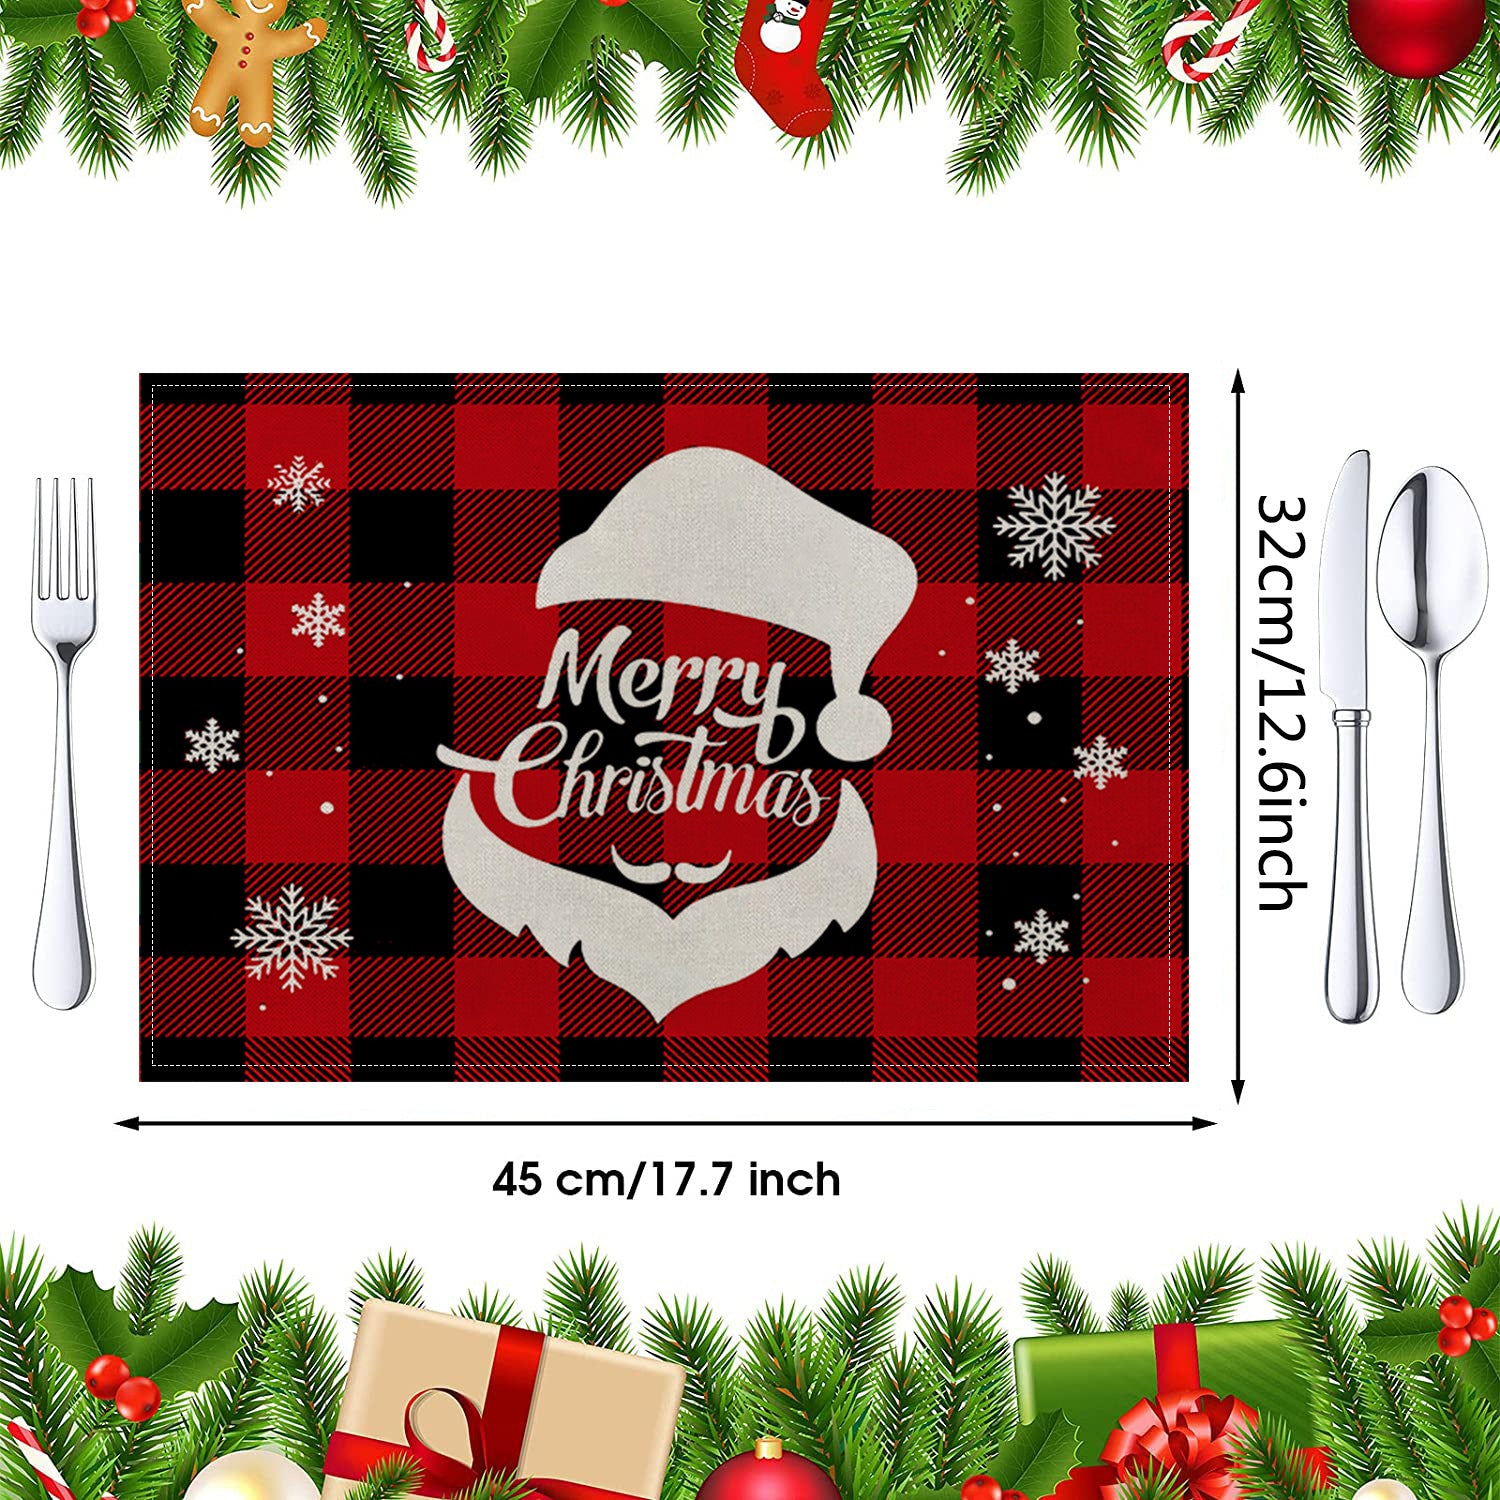 Christmas Cotton Waterproof Linen Insulated Placemats, Outdoor and Indoor Christmas decorations Items, Christmas ornaments, Christmas tree decorations, salt dough ornaments, Christmas window decorations, cheap Christmas decorations, snowmen, and ornaments.